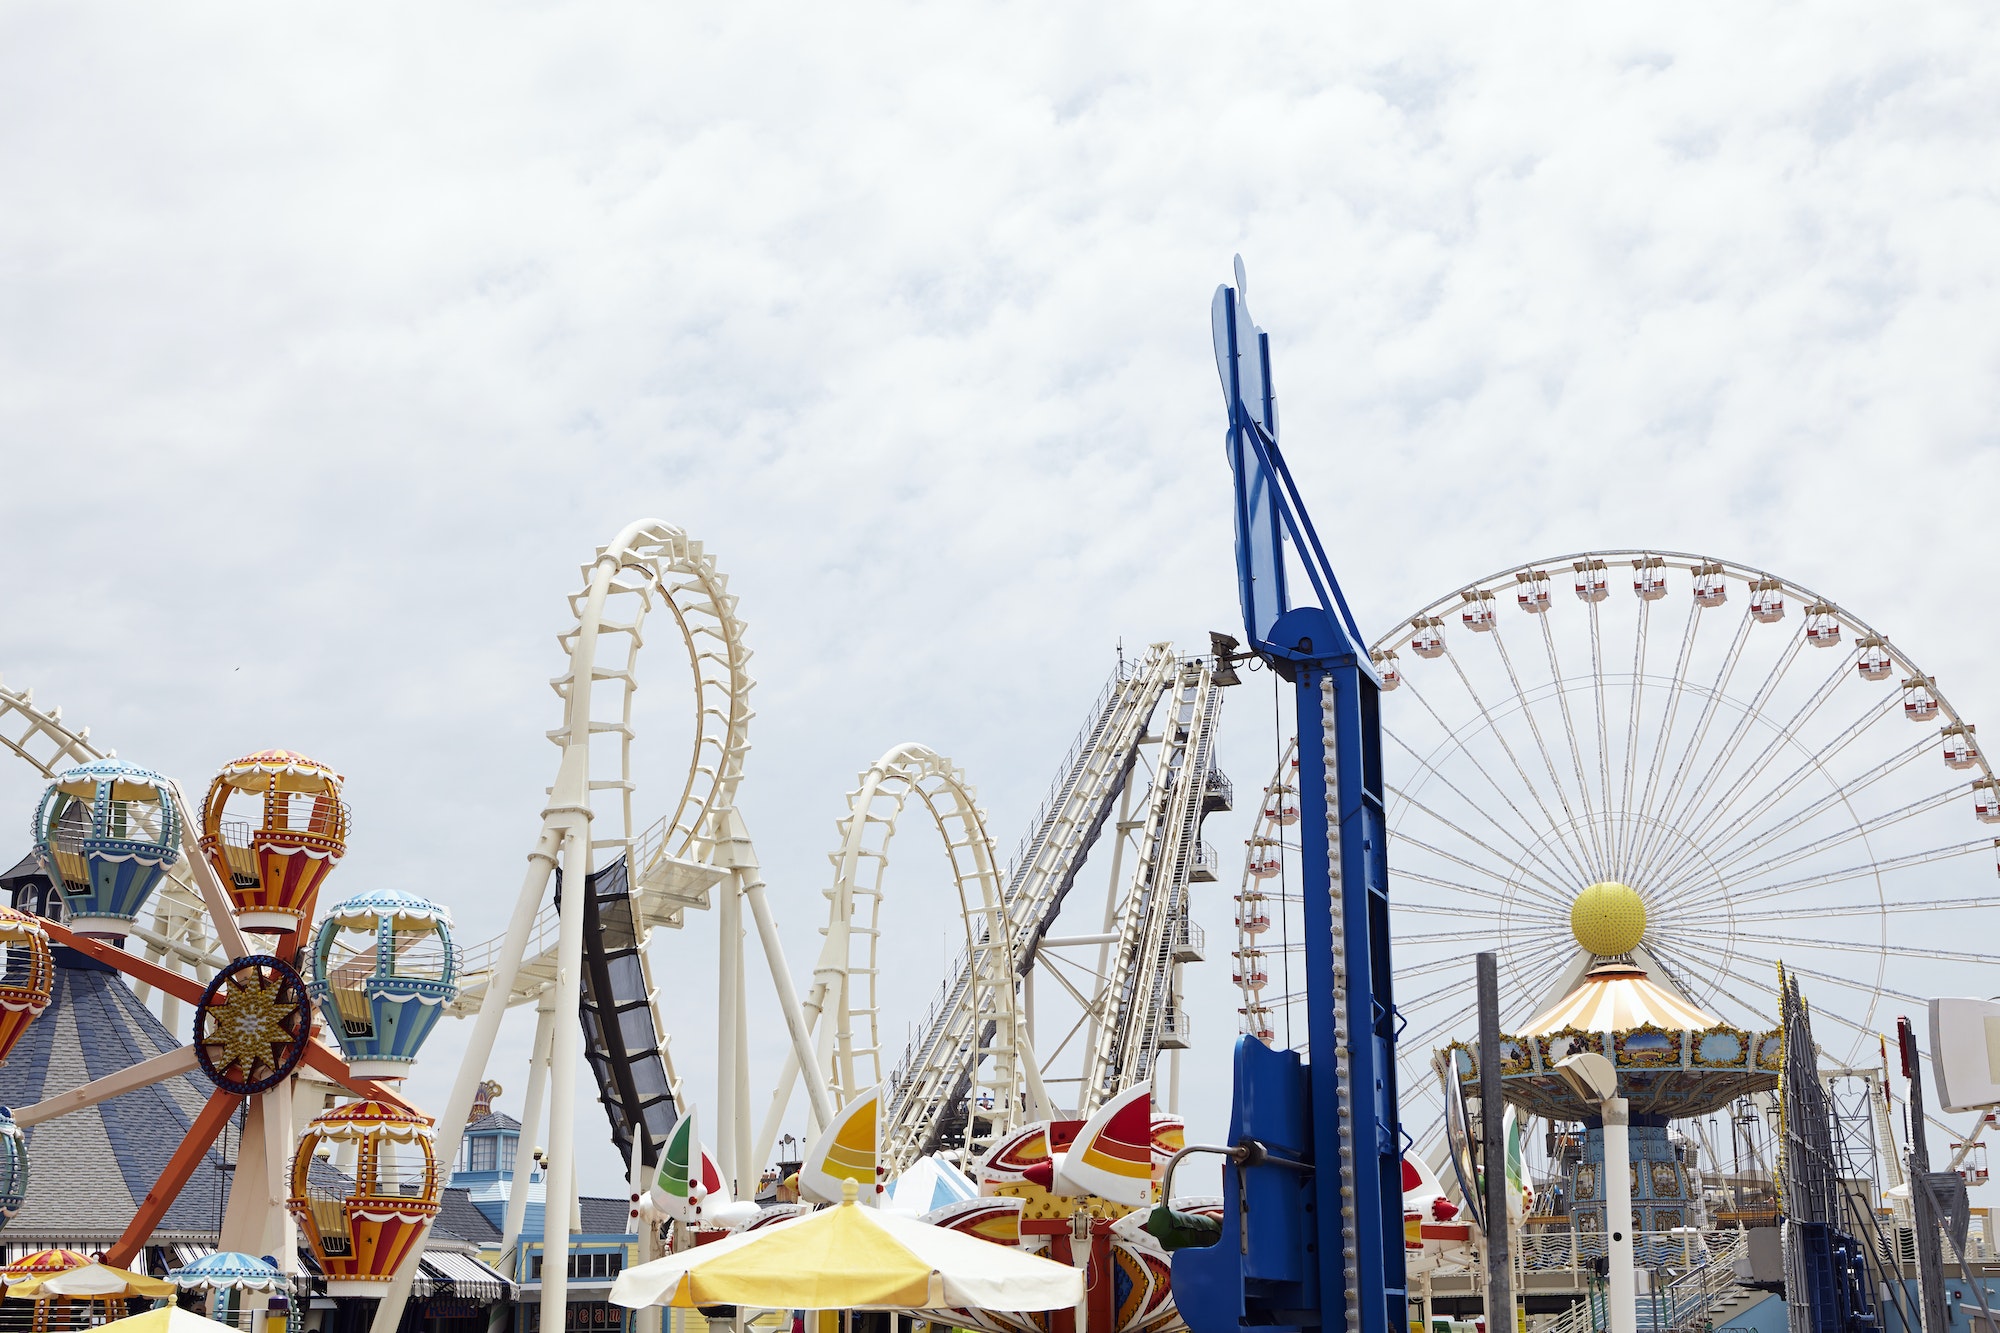 View of amusement park with rollercoaster and ferris wheel